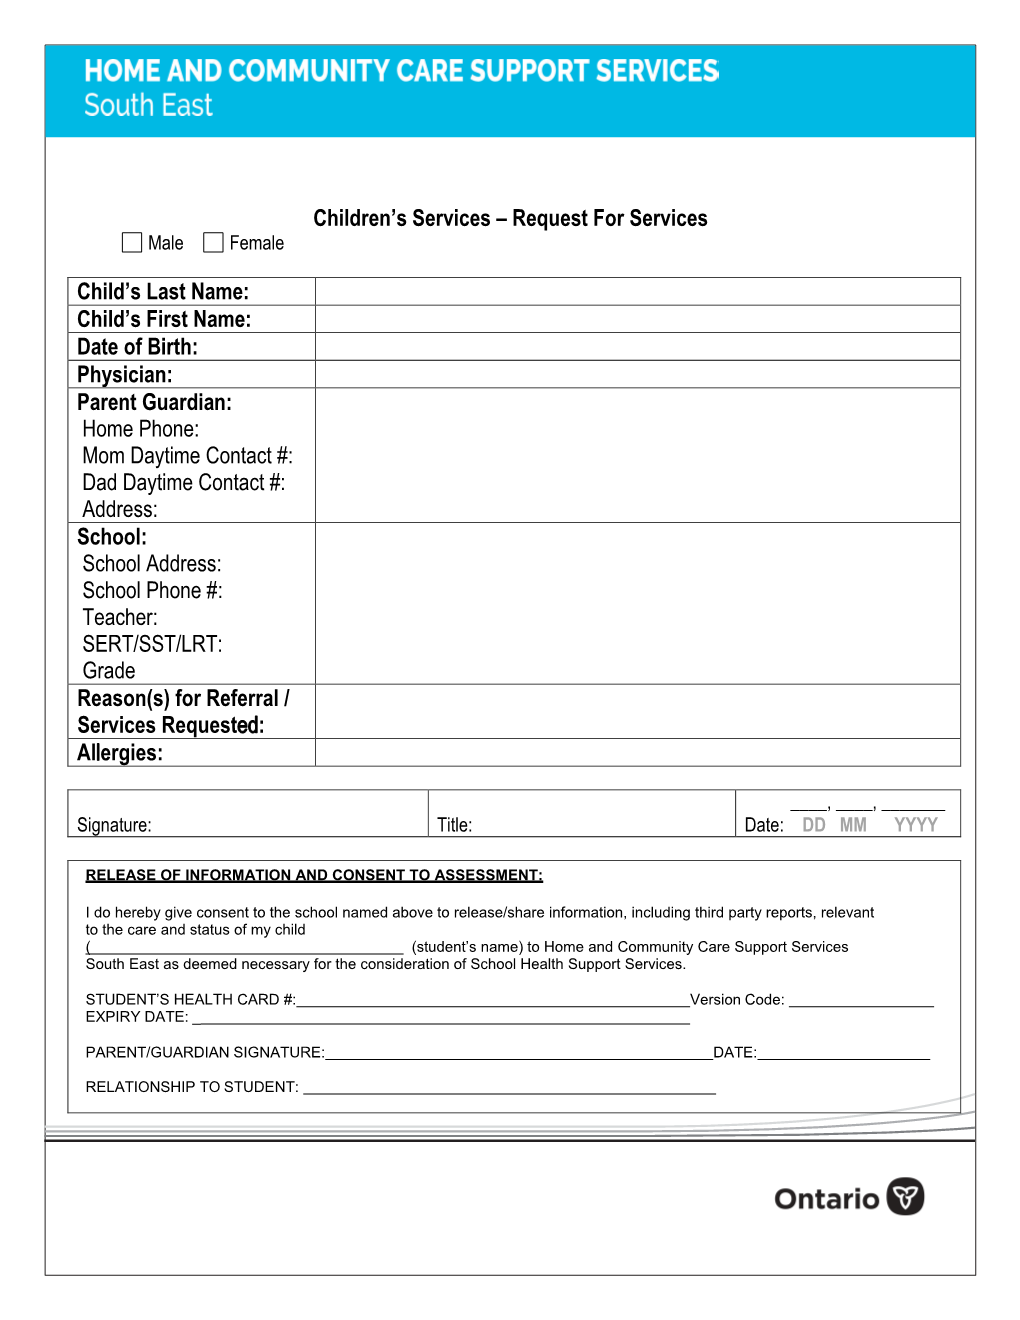 Children's Services – Request for Services Child's Last Name: Child's First Name: Date of Birth: Physician: Parent Guard